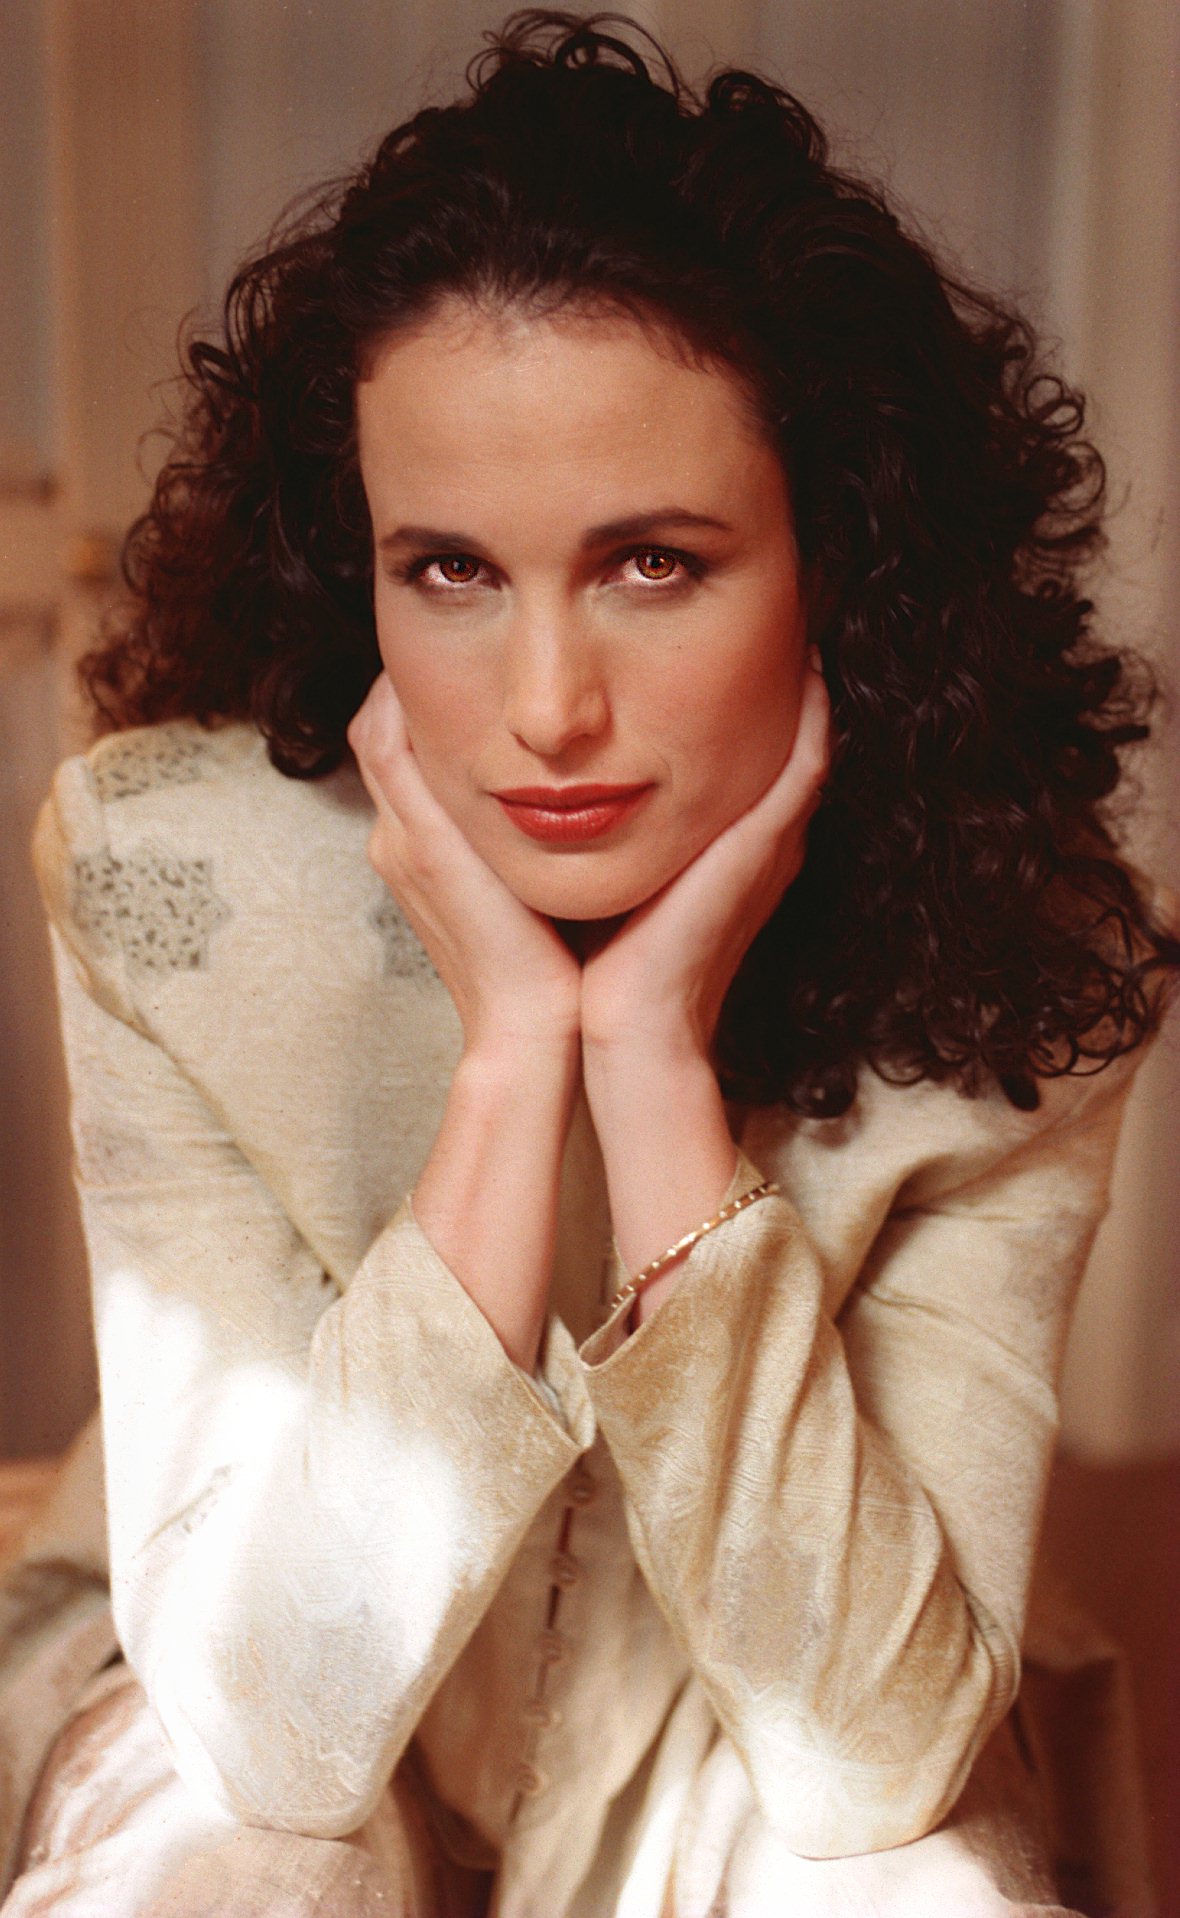 Andie MacDowell im Four Seasons Hotel in Boston am 11. September 1995 | Quelle: Getty Images